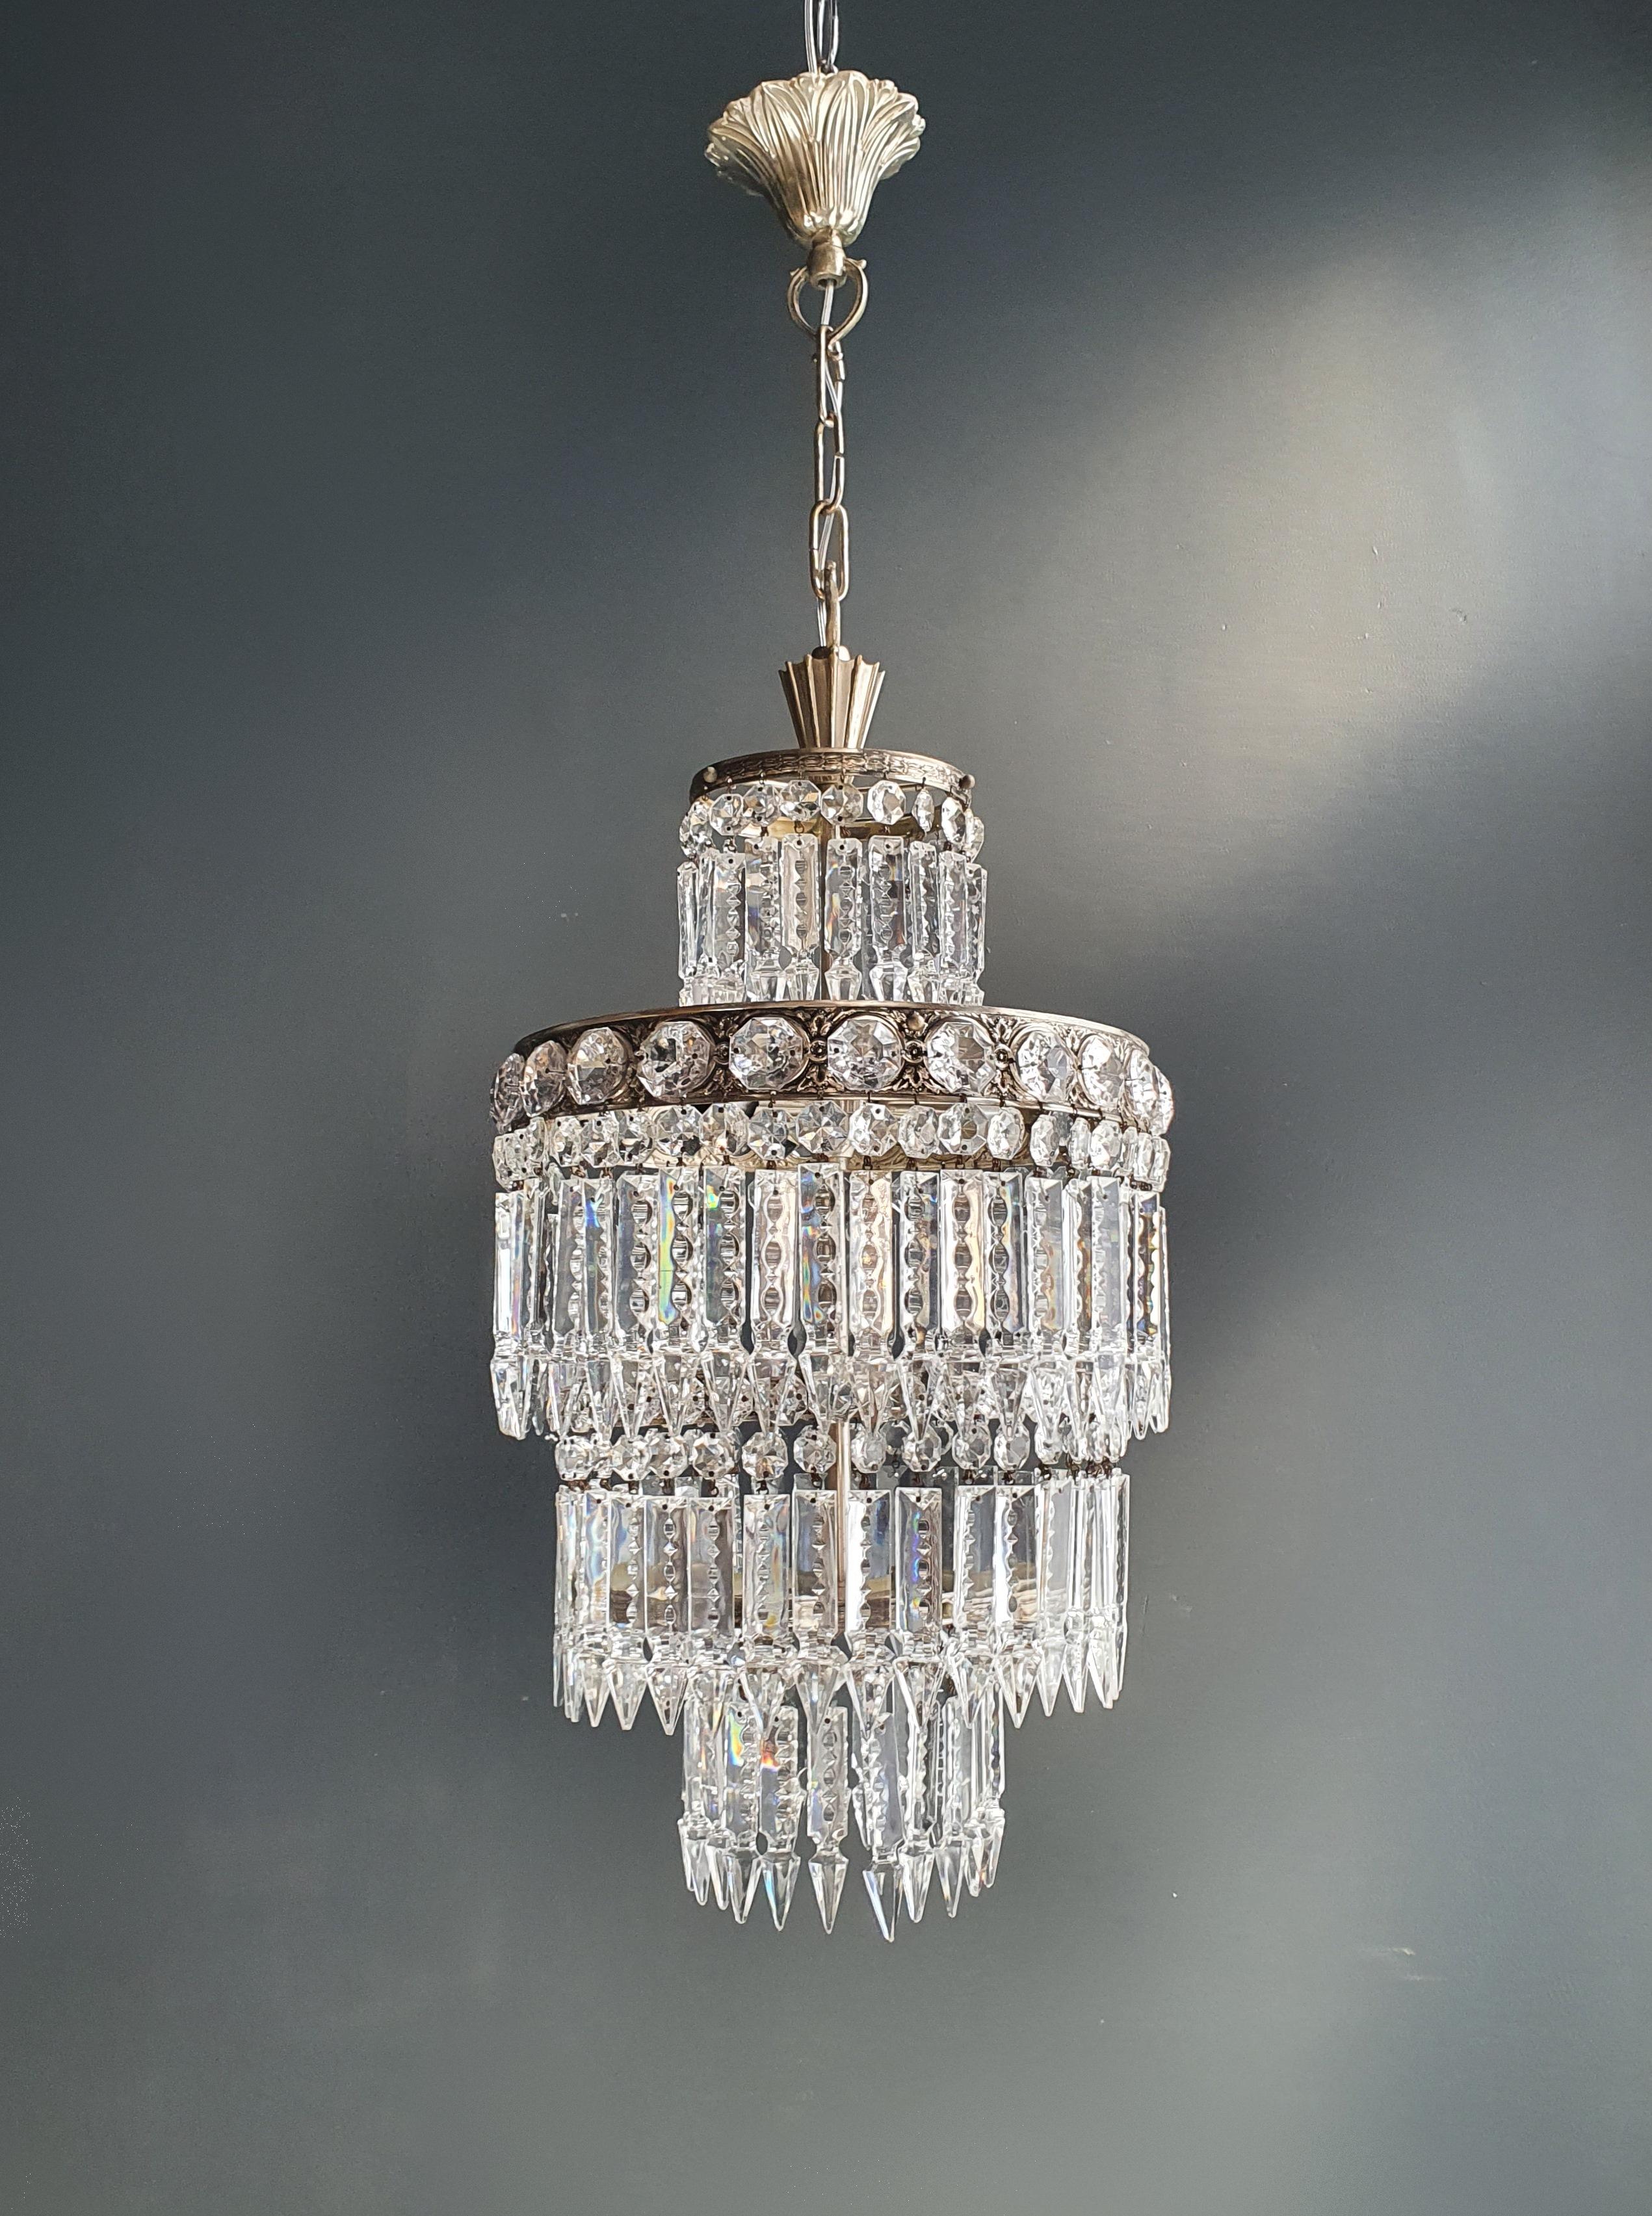 Introducing our exquisite smaller chandelier - a masterpiece of elegance and style that will fit seamlessly into any room. With its compact dimensions and stunning details, this chandelier will add a touch of luxury and charm to your home.

Key